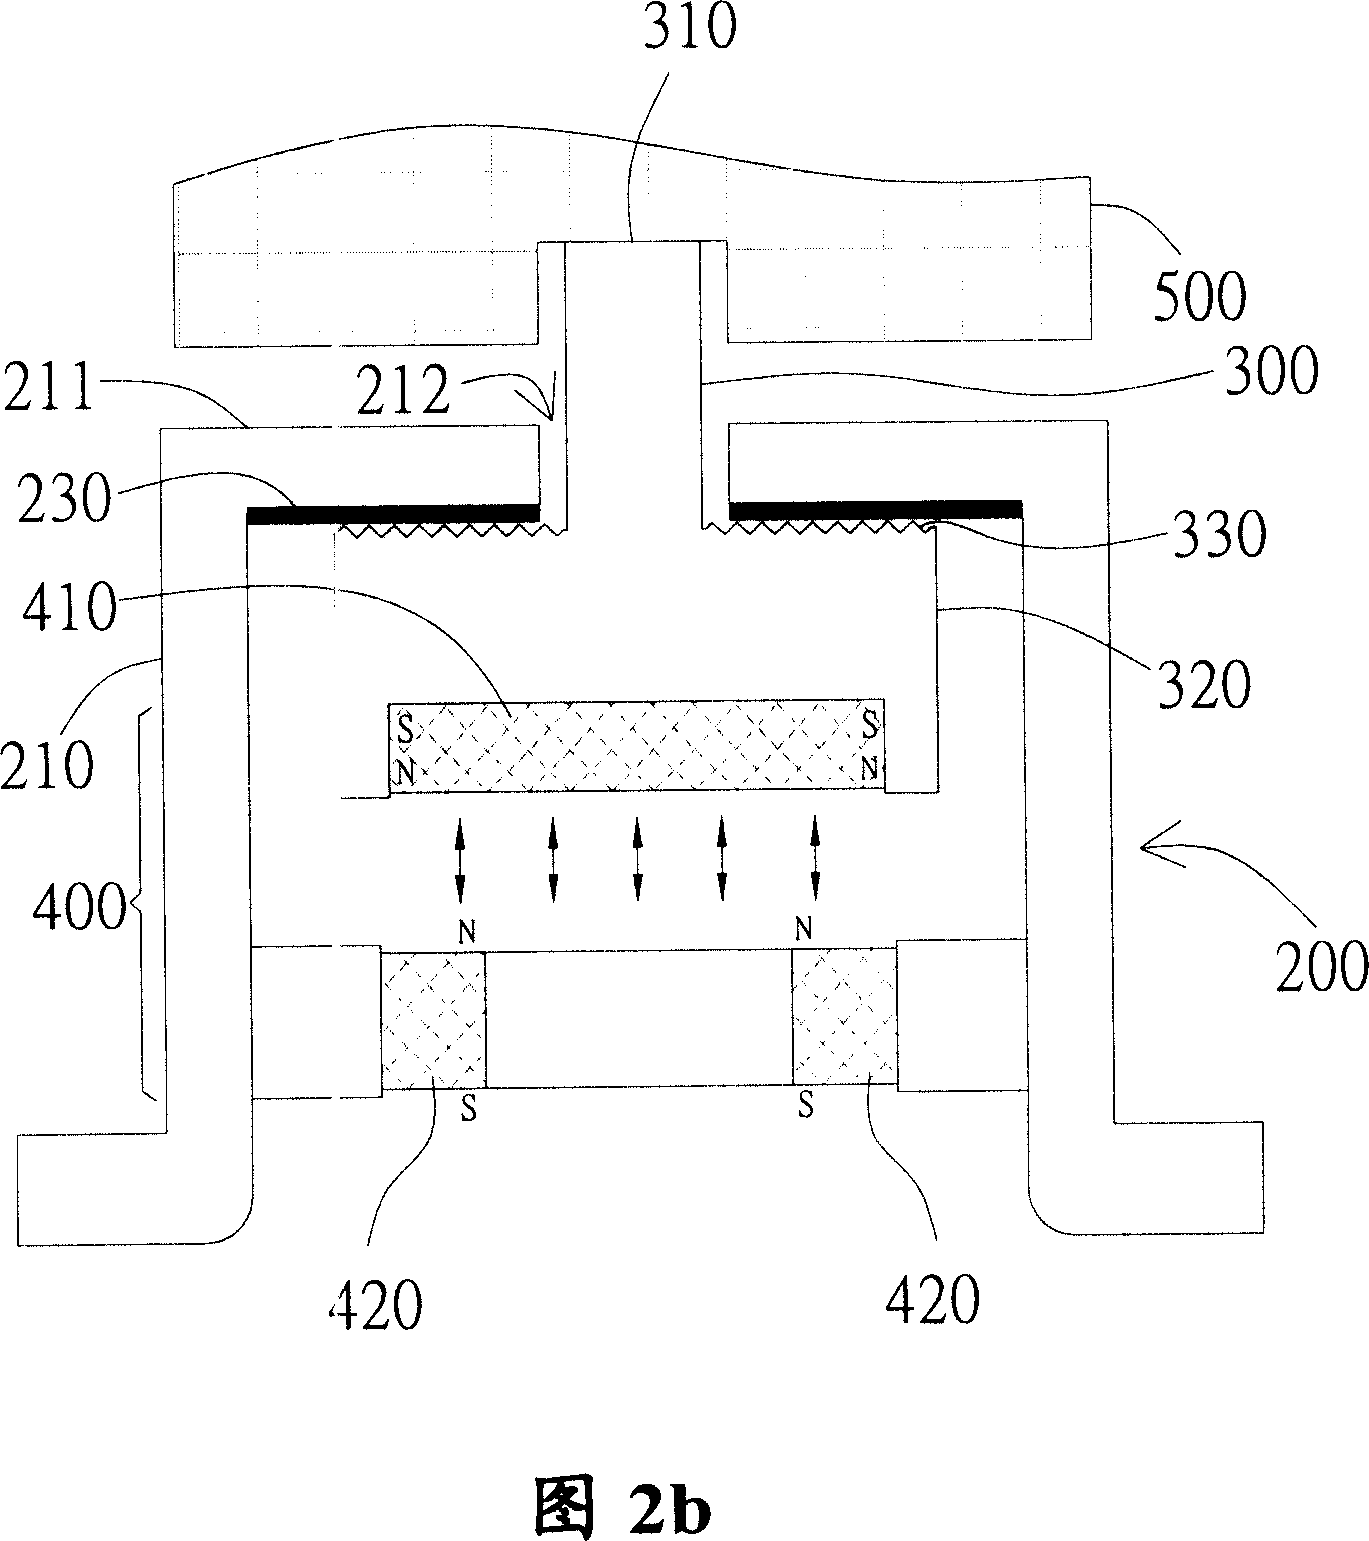 Stepless rotary positioning apparatus